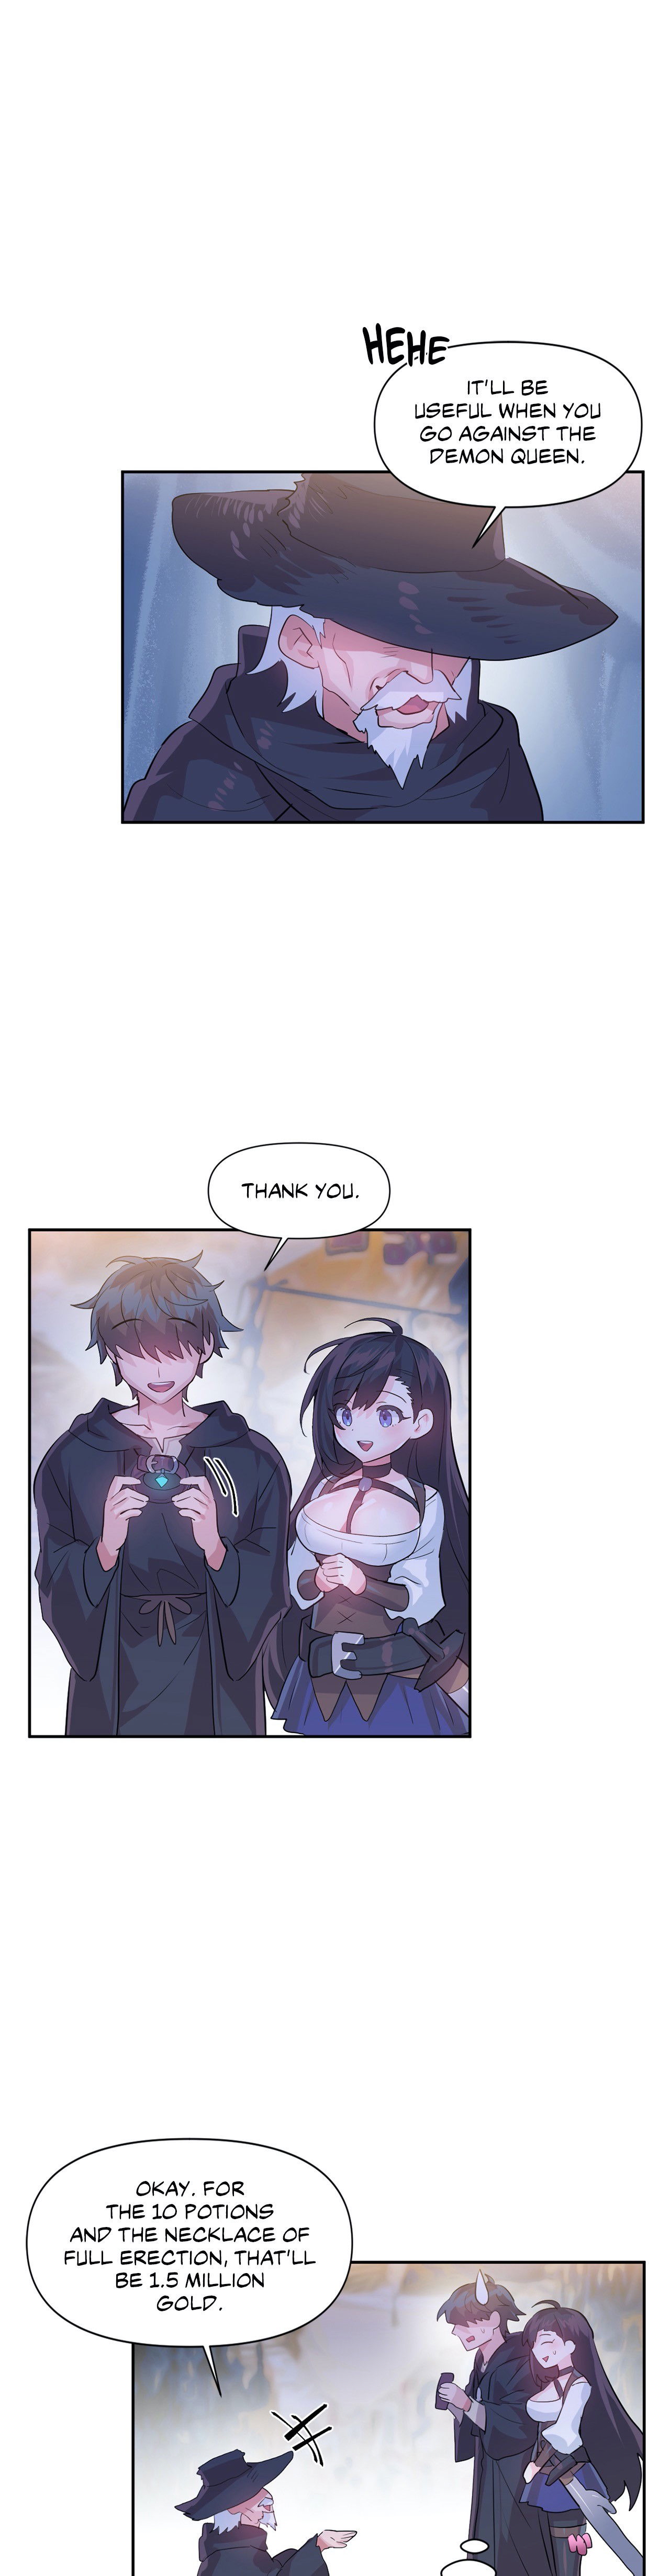 log-in-to-lust-a-land-chap-32-20